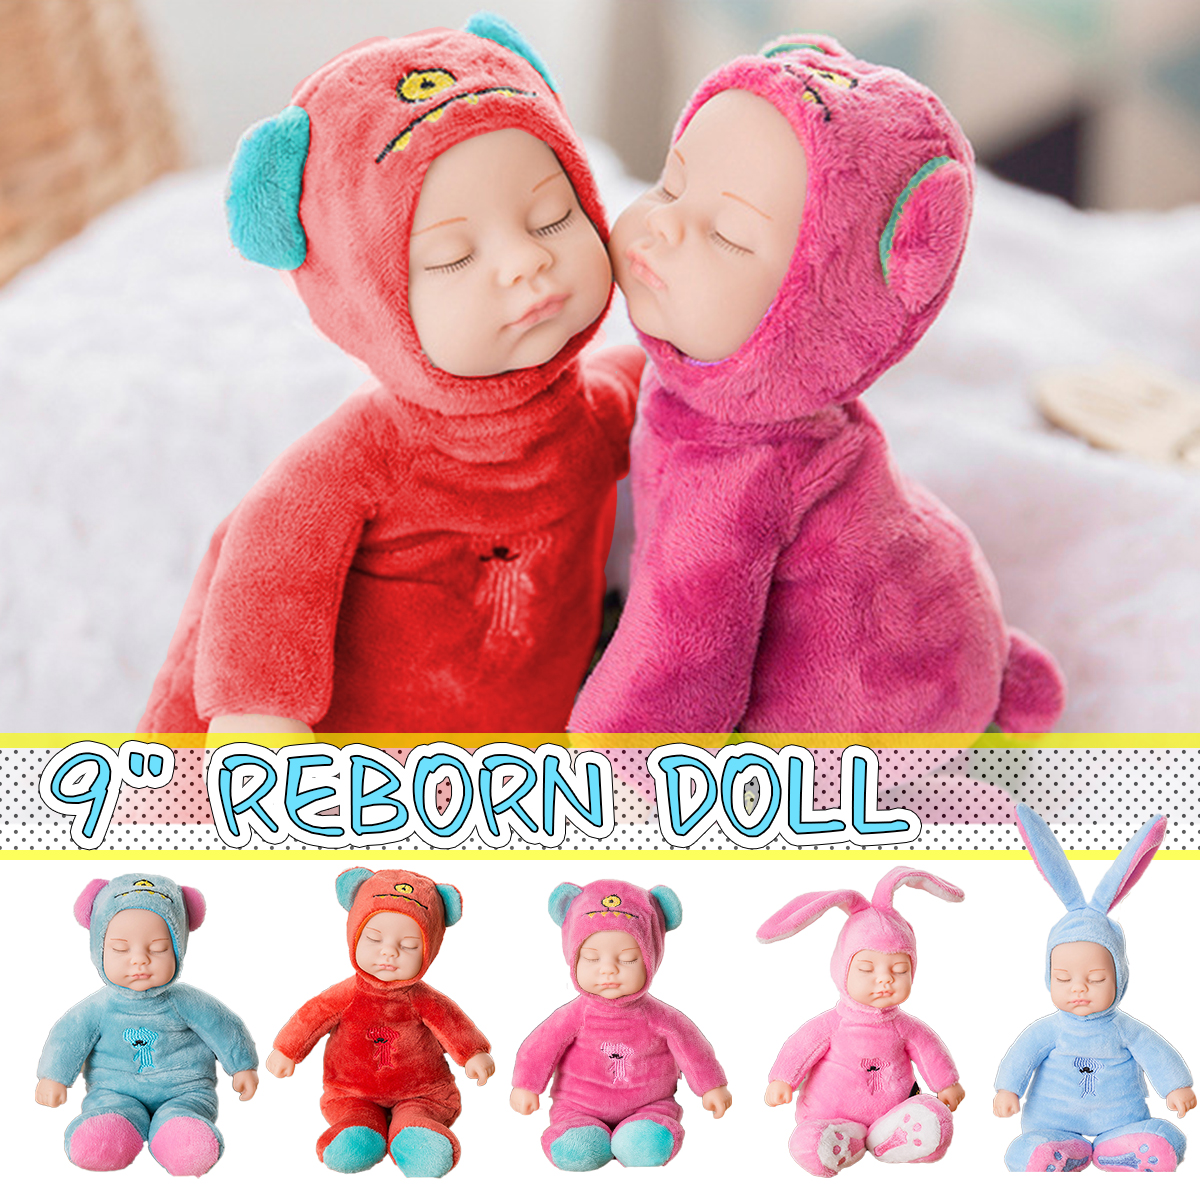 23CM-Soft-Silicone-Vinyl-Lifelike-Realistic-Reborn-Cute-Bear-Rabbit-Doll-Toy-with-Clothes-1722622-1